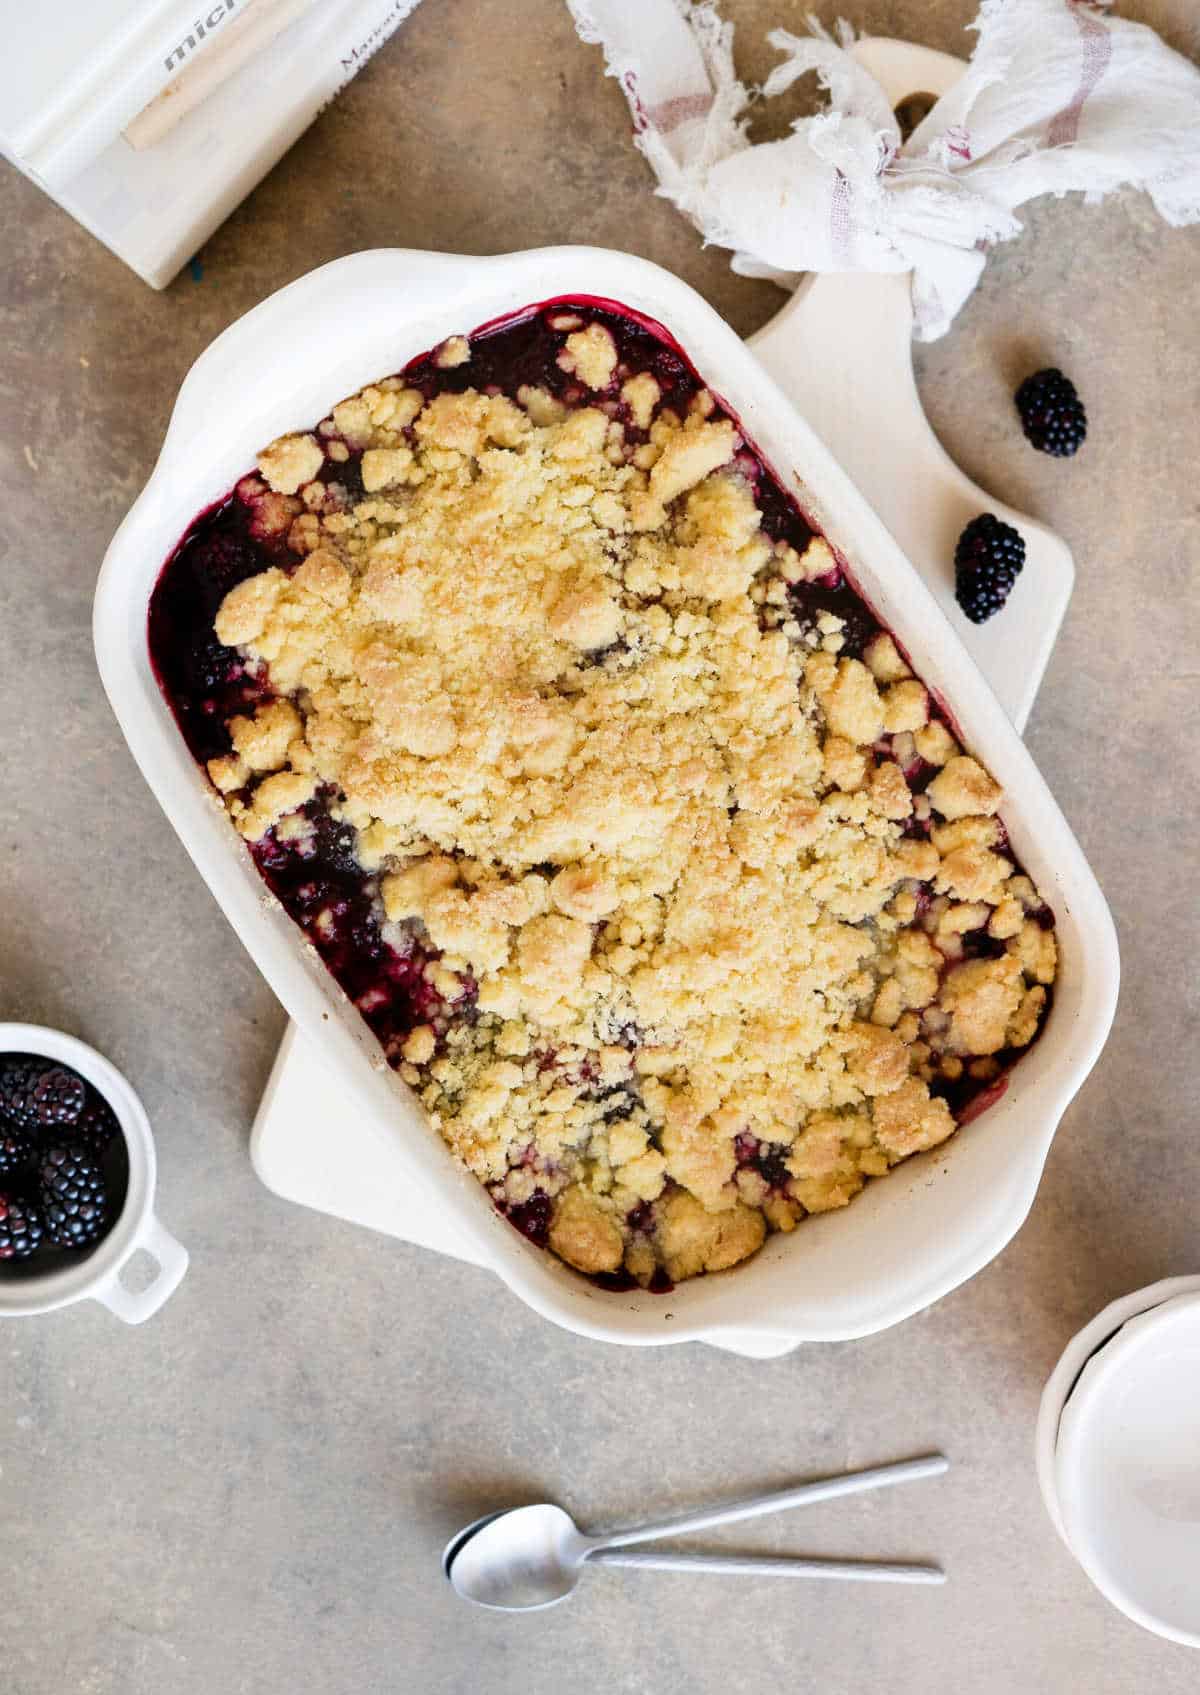 Top view of white rectangular dish with blackberry dump cake on a brownish surface. Bowls, spoons, loose blackberries around.